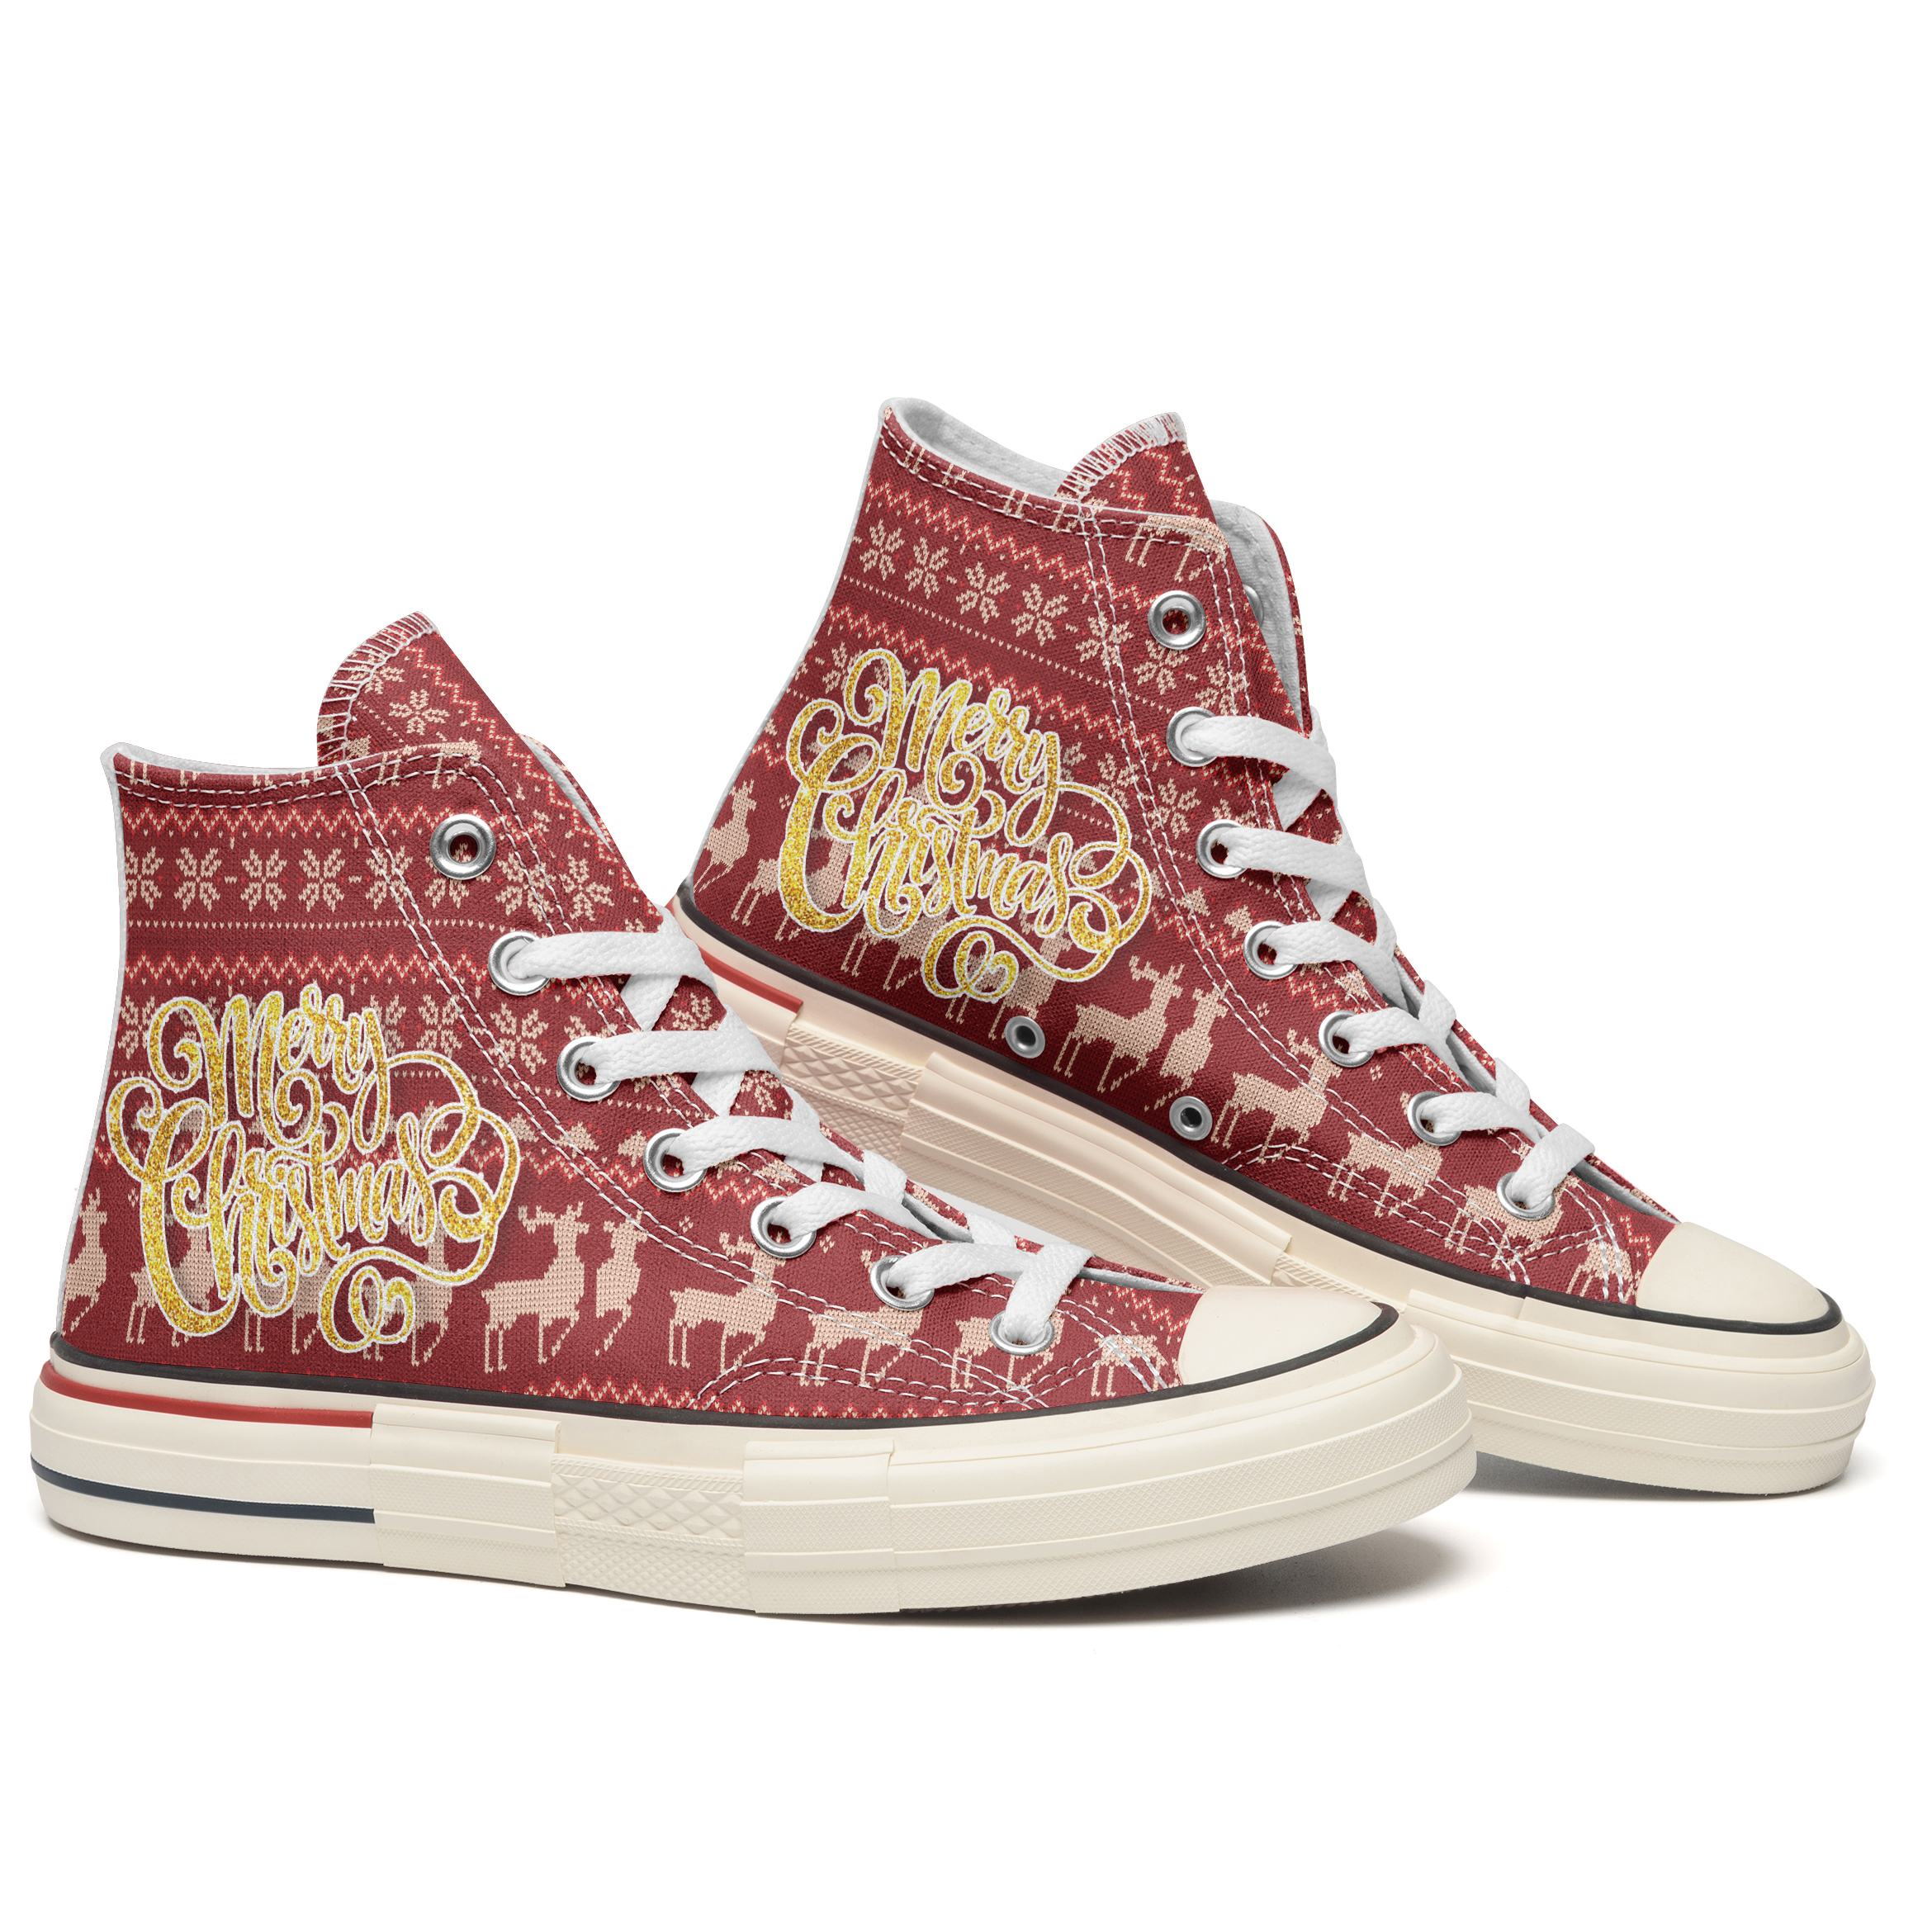 Harley Quinn Galaxy High Top Canvas Shoes Special Edition